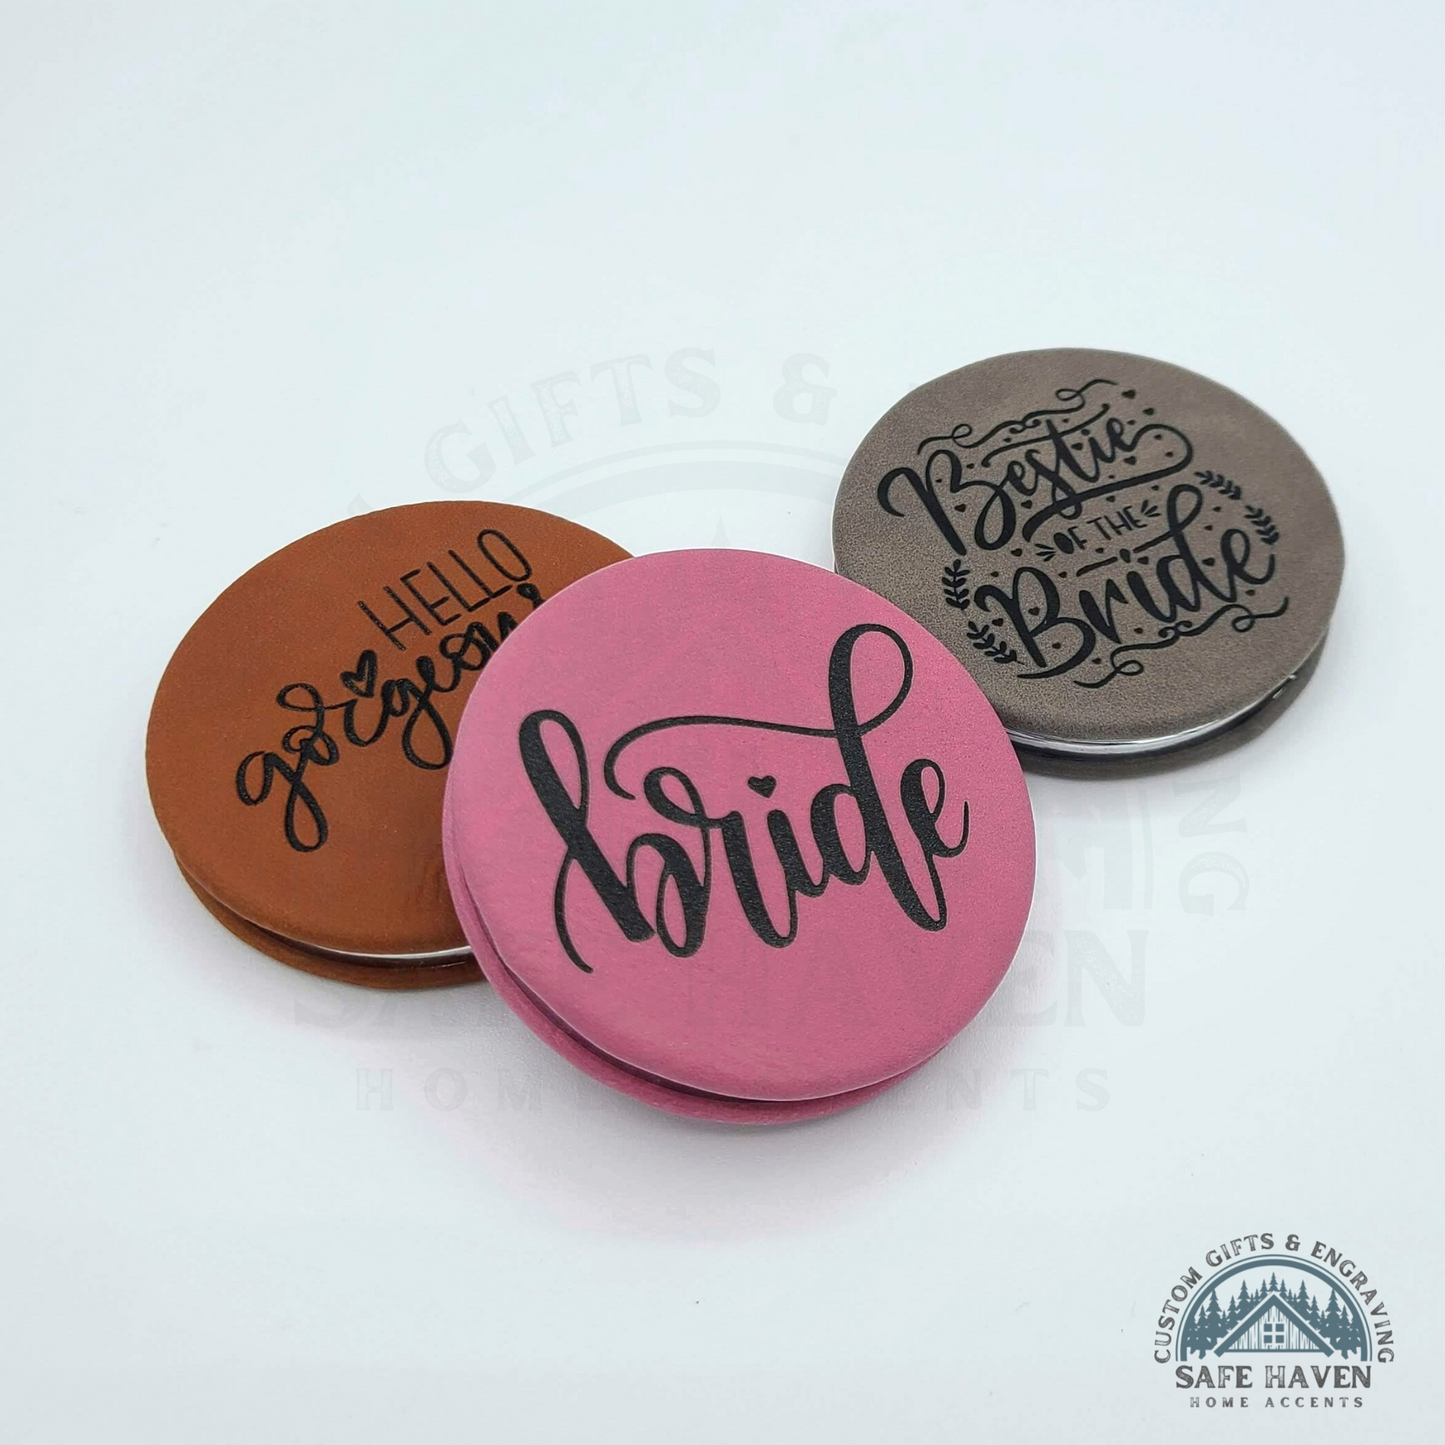 Leatherette Compact Mirrors